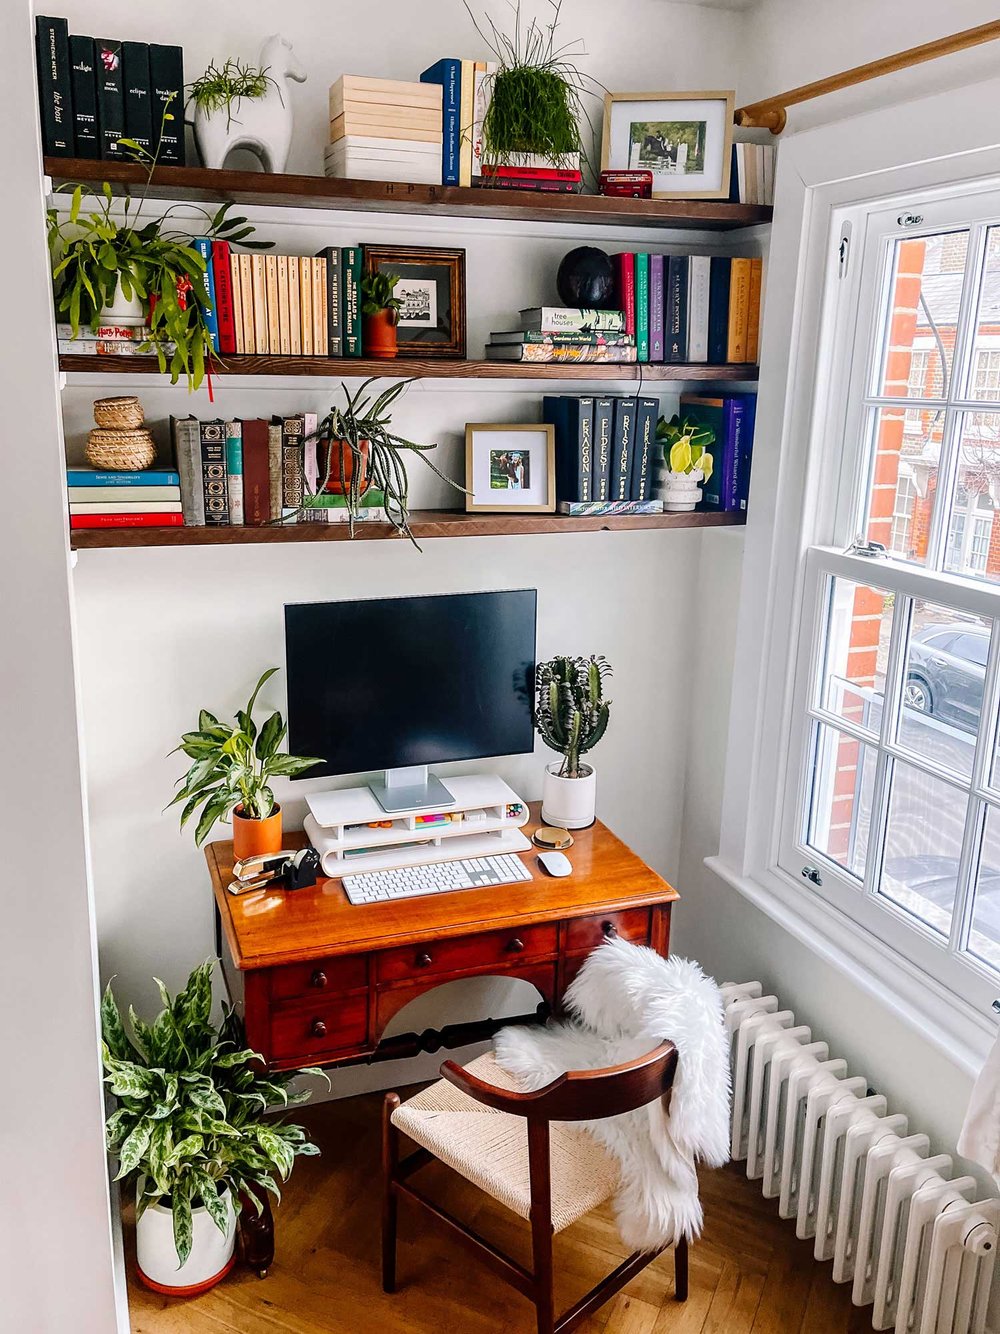 Home office nook with shelves and antique desk